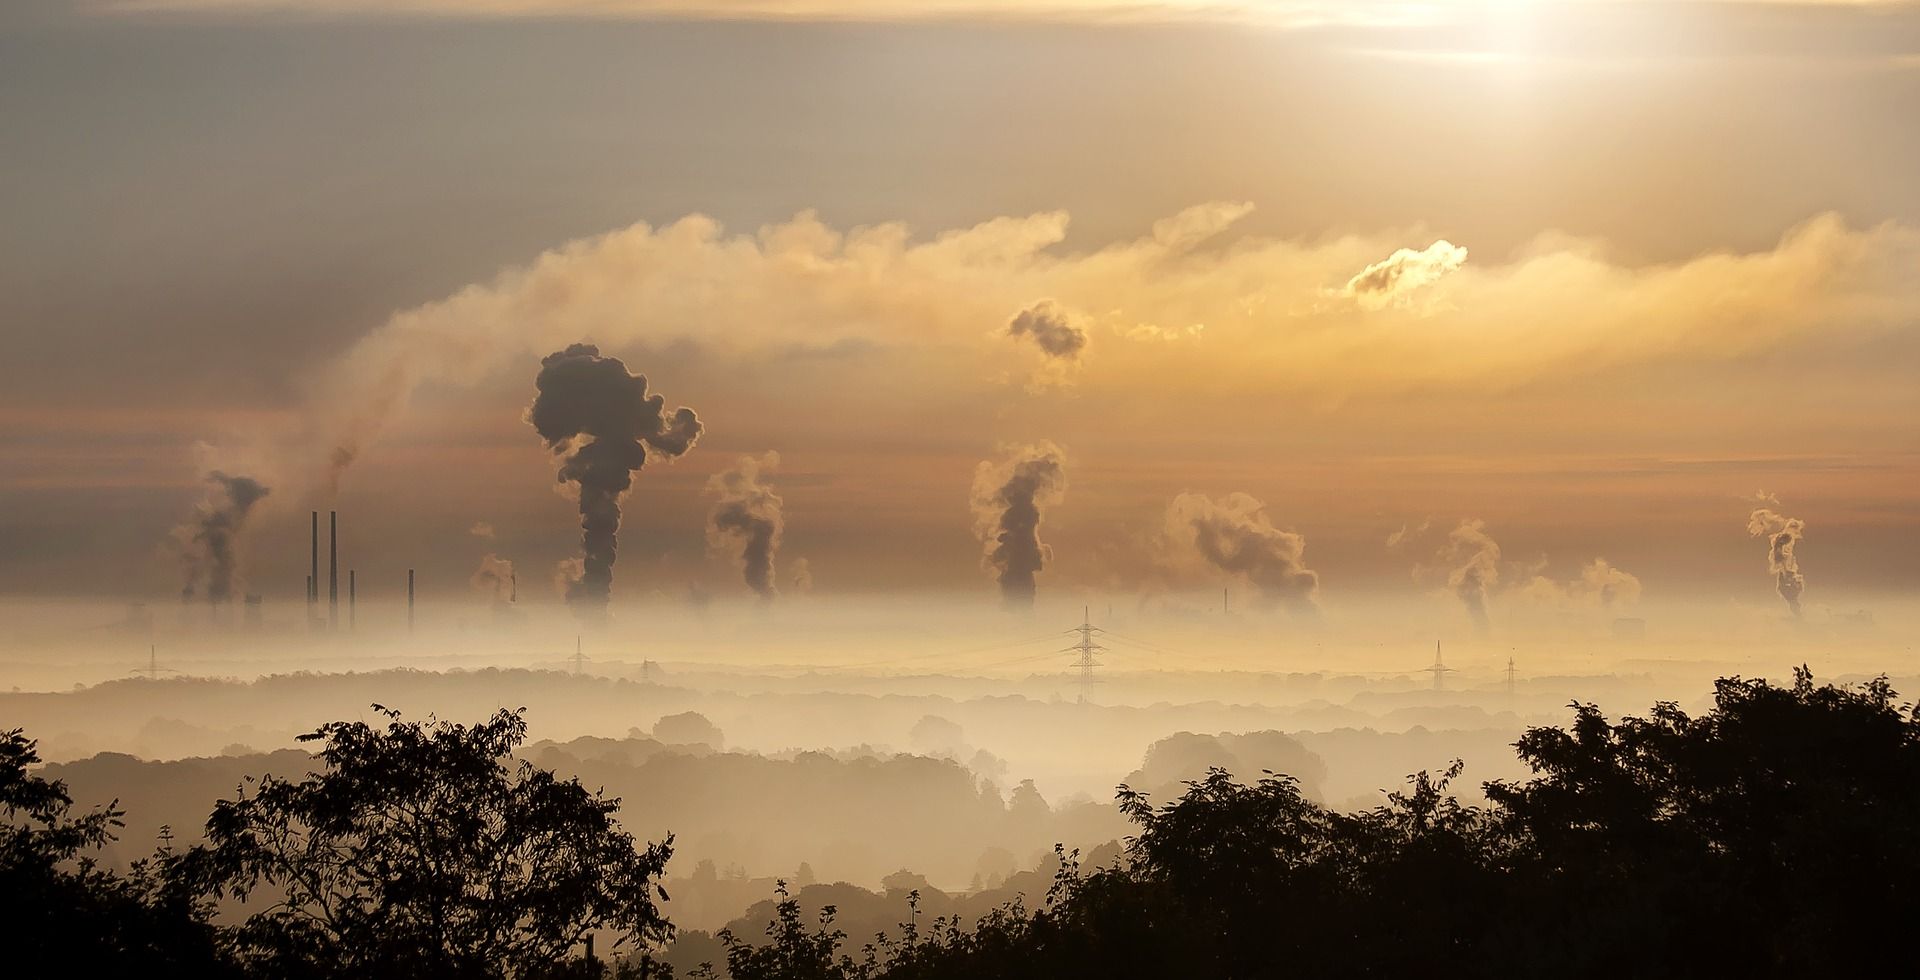 In the horizon, tall smokestacks release industrial pollution and create smog cover